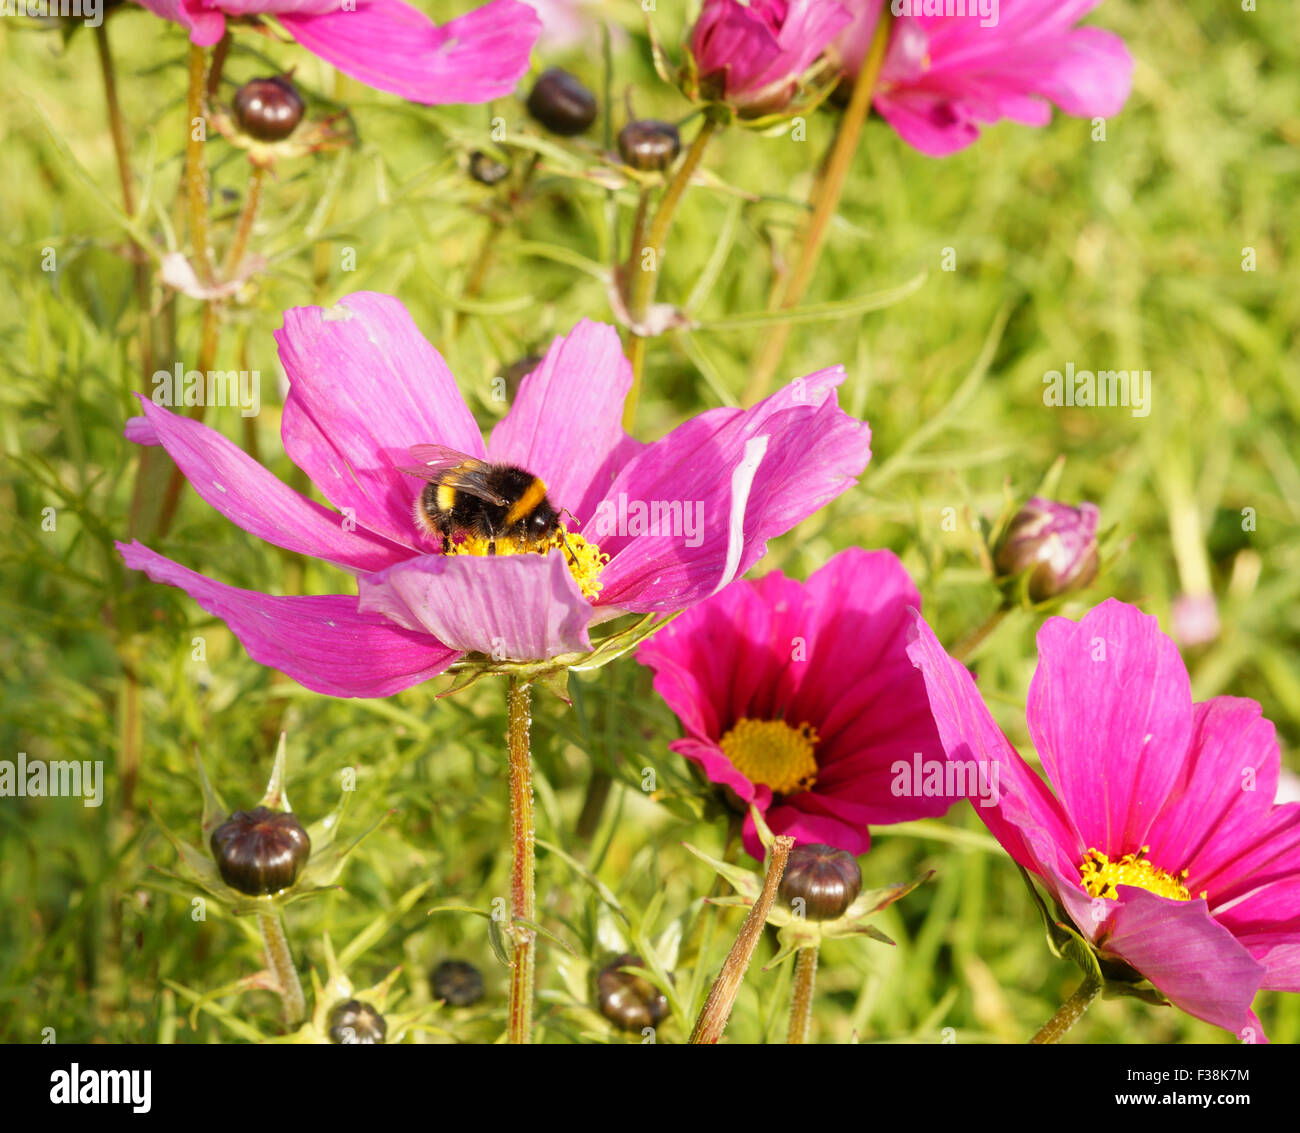 Bumble Bee on Wild Pink Flower in a field of wild flowers and green grass, Looks like Pink Daisy Stock Photo